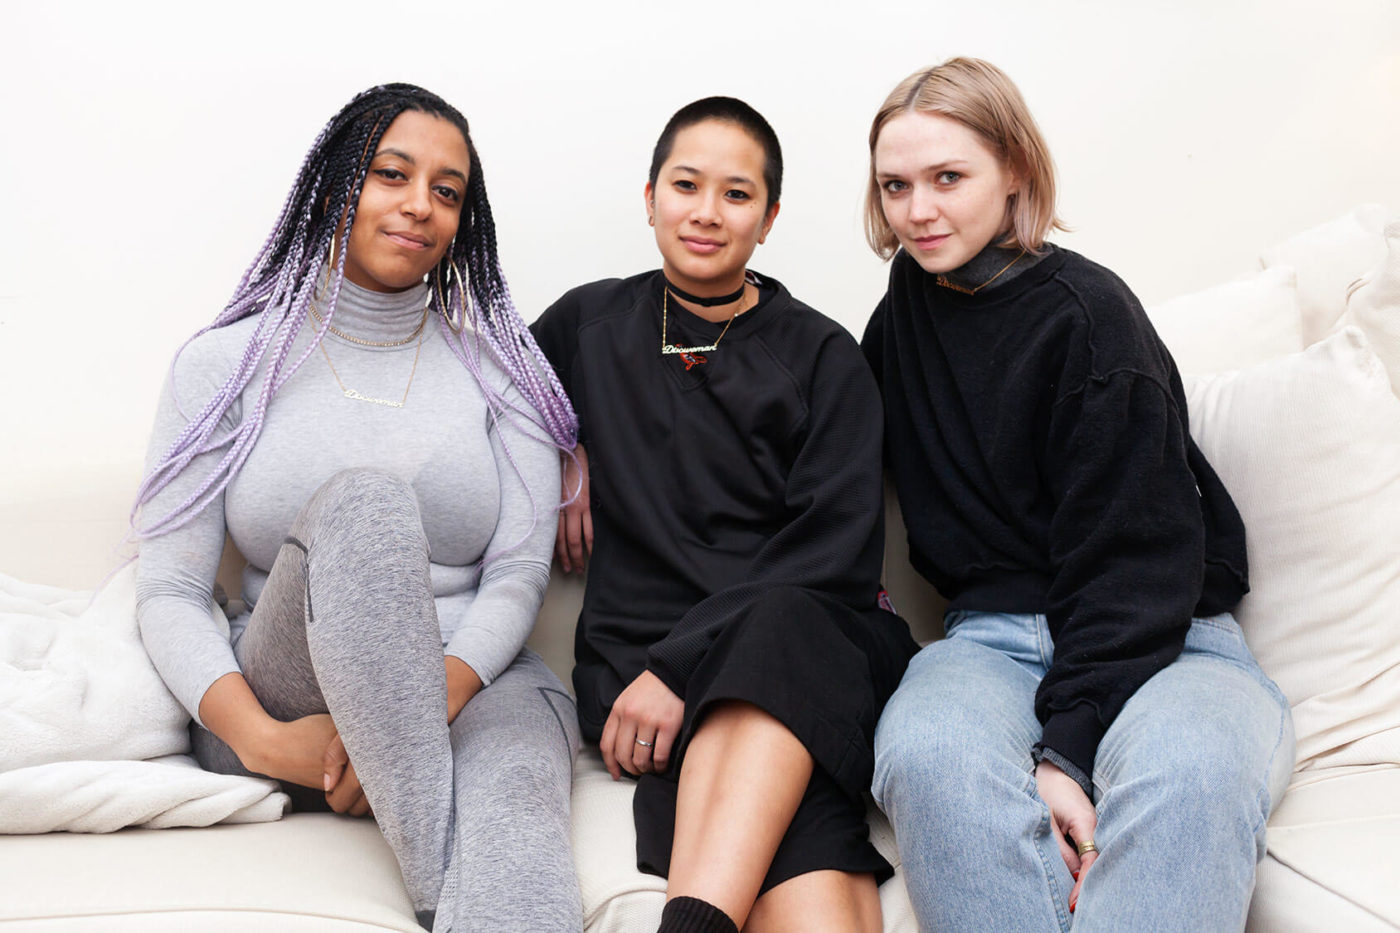 Brooklyn-based artist collective Discwoman